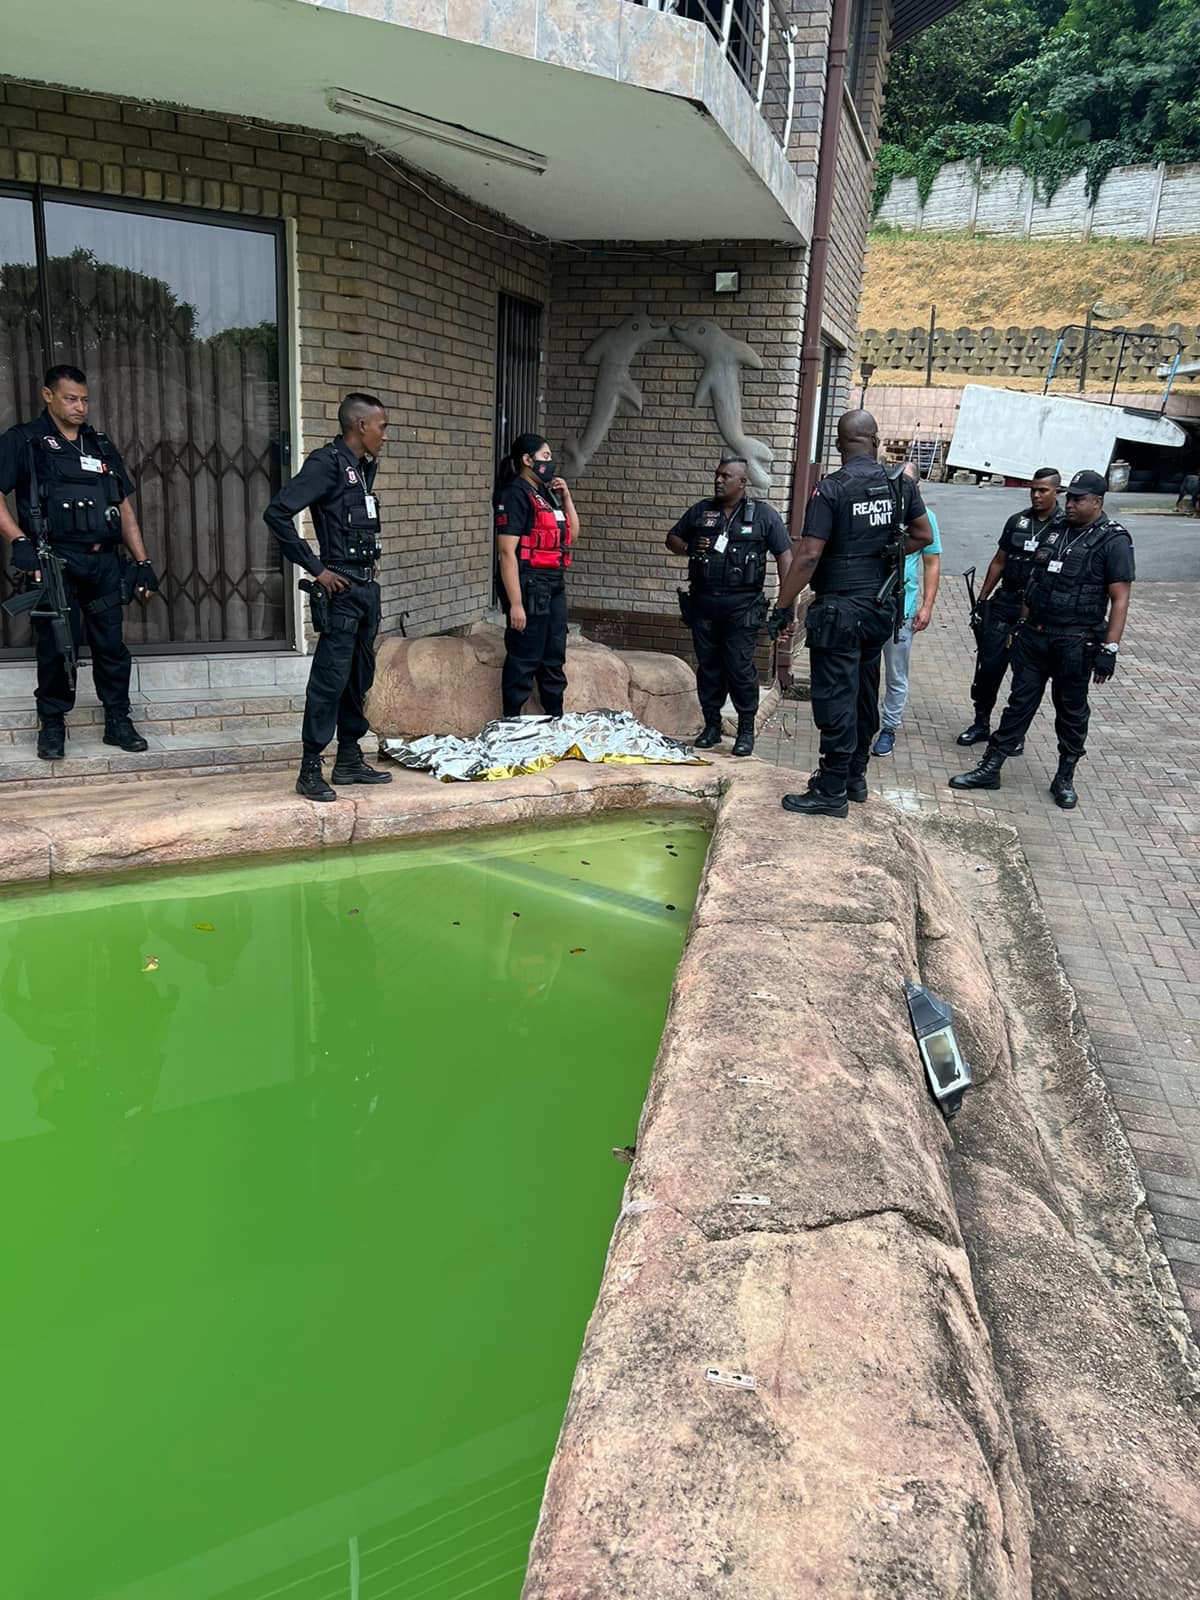 Missing child discovered drowned in Lotusville